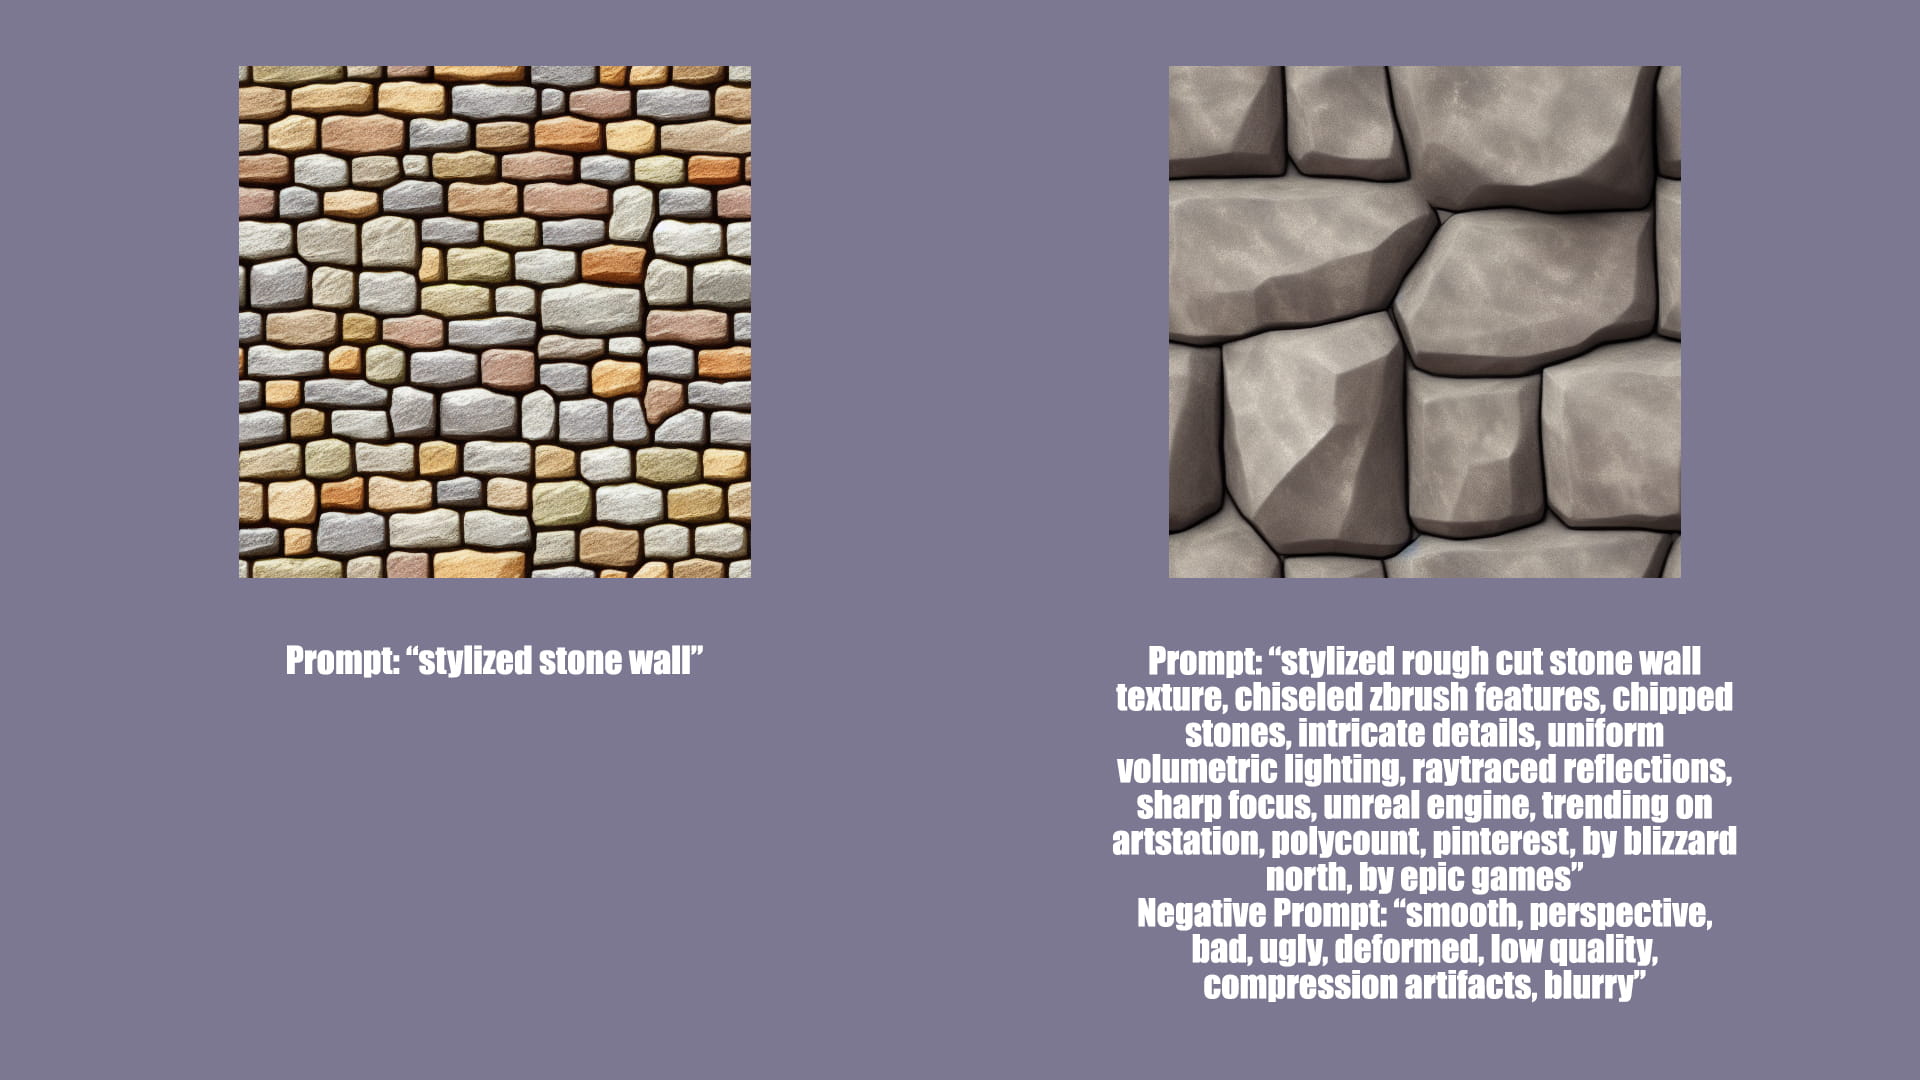 Prompt: "Stylised stone wall" compared to Prompt: "stylized rough cut stone wall texture chiseled zbrush features, chipped stones, intricate details, uniform volumetric lighting, raytraced reflections sharp focus, unreal engine, trending on artstation, polycount, pinterest... Negative Prompt: "smooth, perspective, bad, ugly"